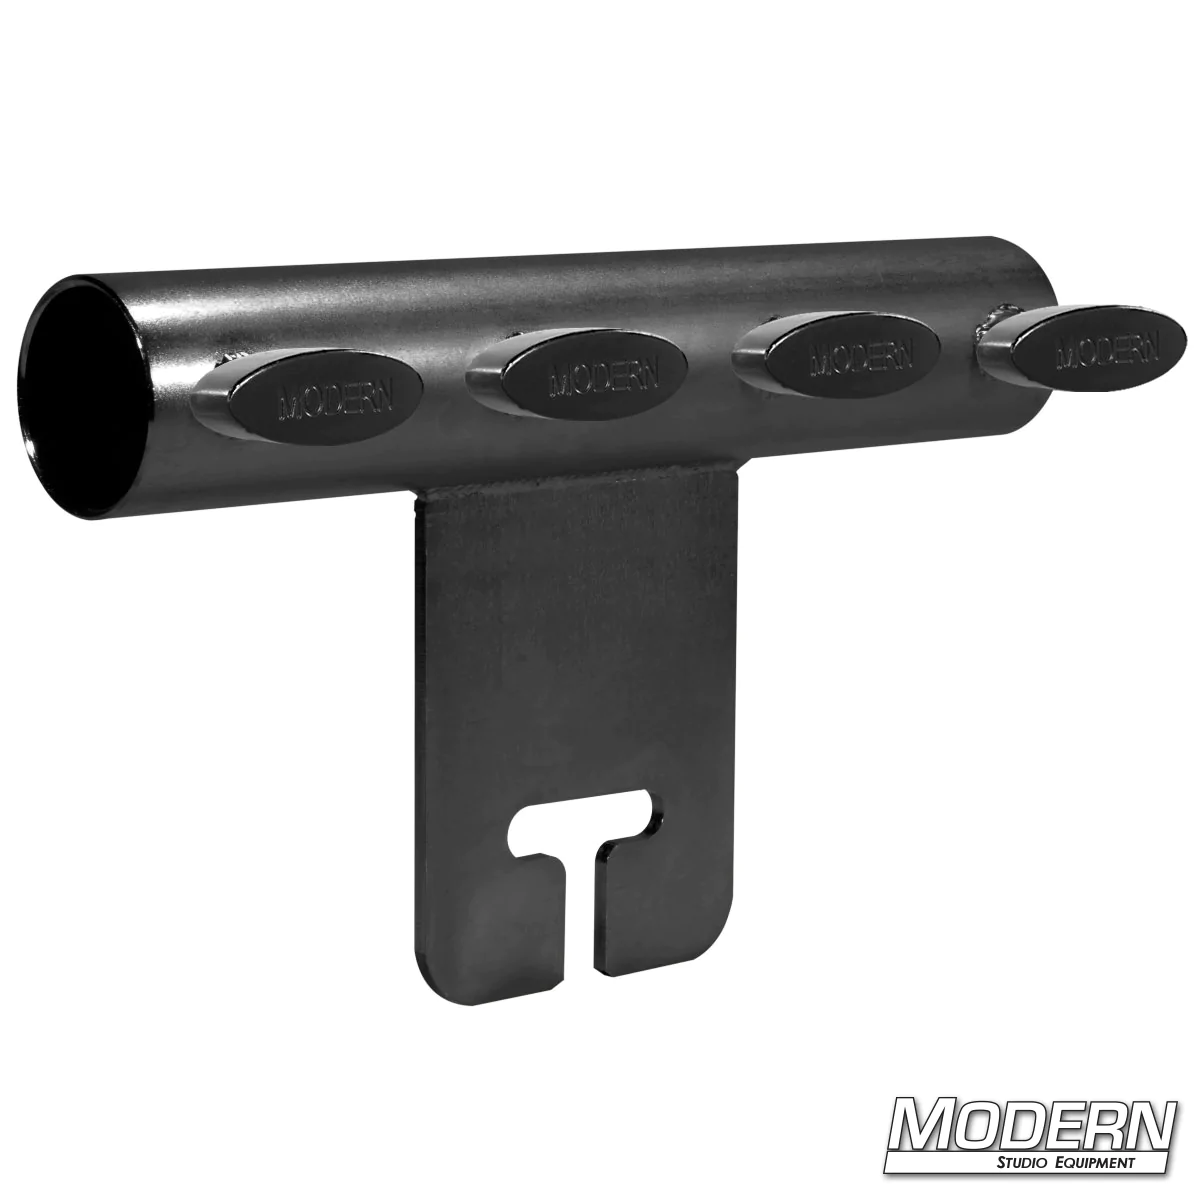 Ear for 1-1/2" Speed-Rail® - Black Zinc with T-Handles